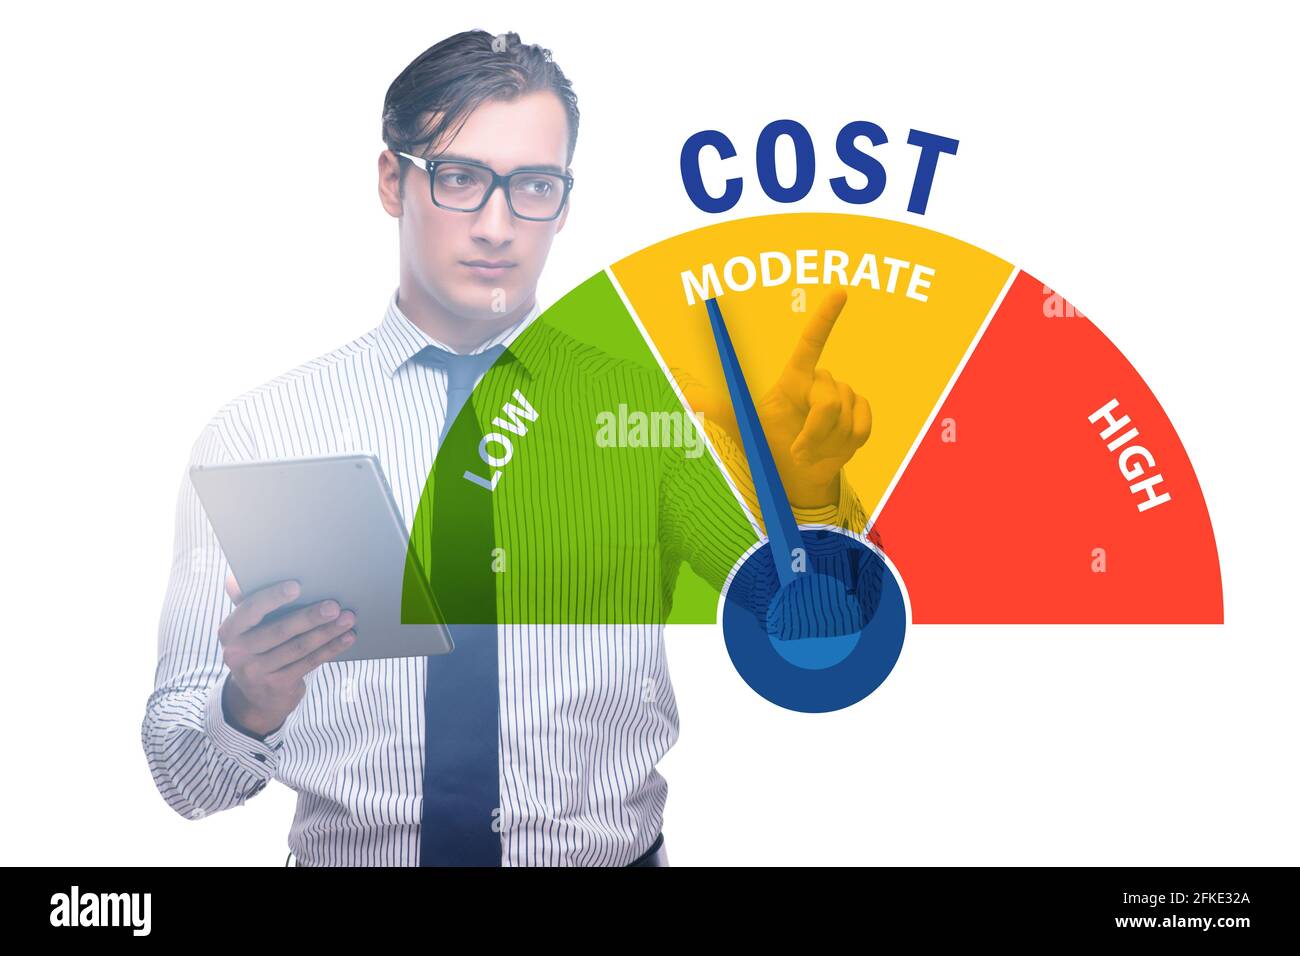 Businessman in the cost management concept Stock Photo